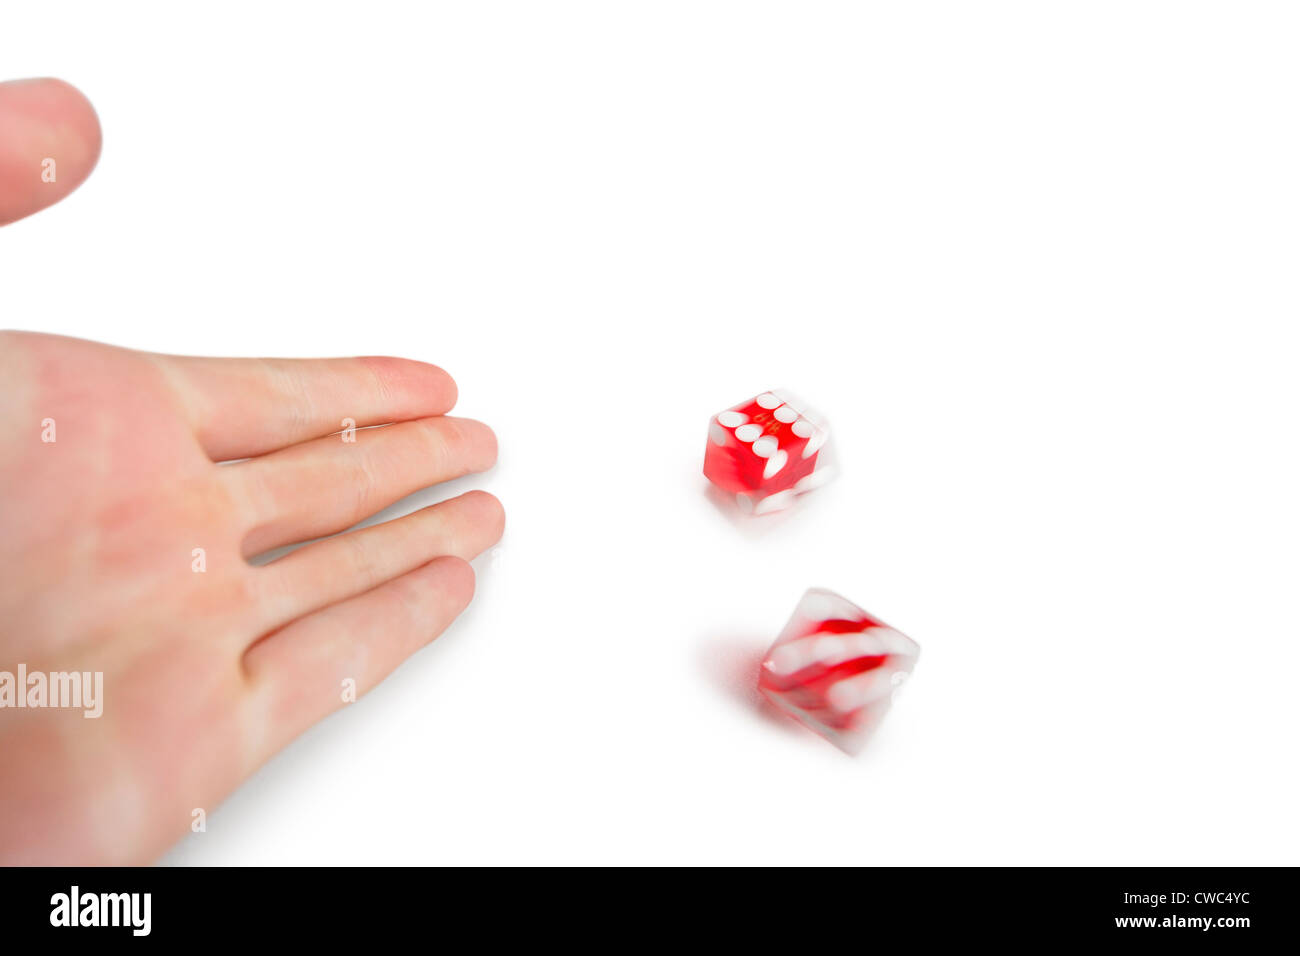 Cropped image of hands throwing gambling dice over white background Stock Photo